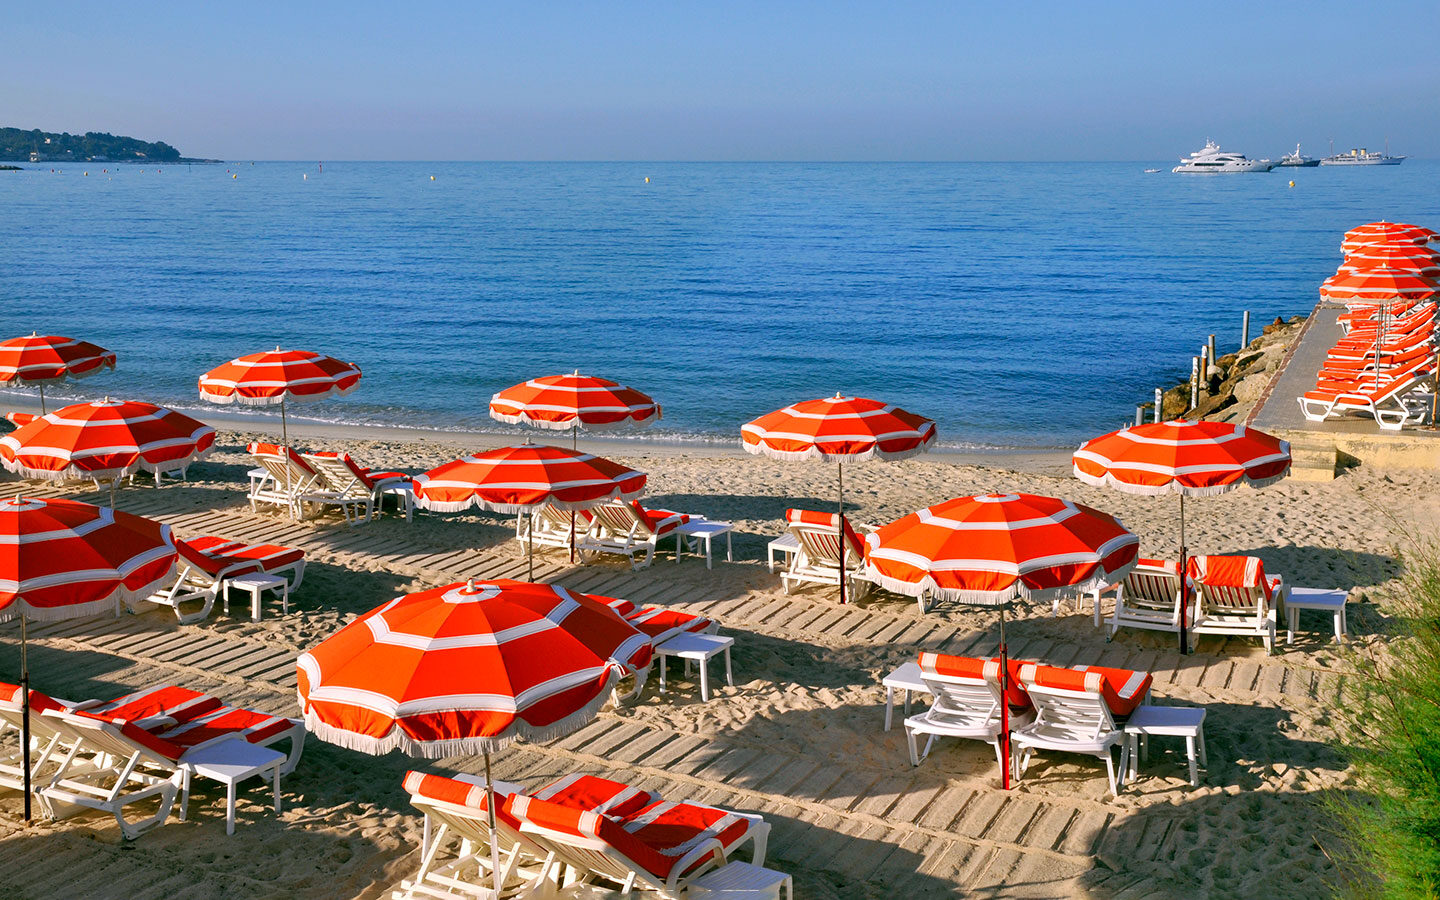 Sunbeds on the beach in Juan-les-Pins, South of France